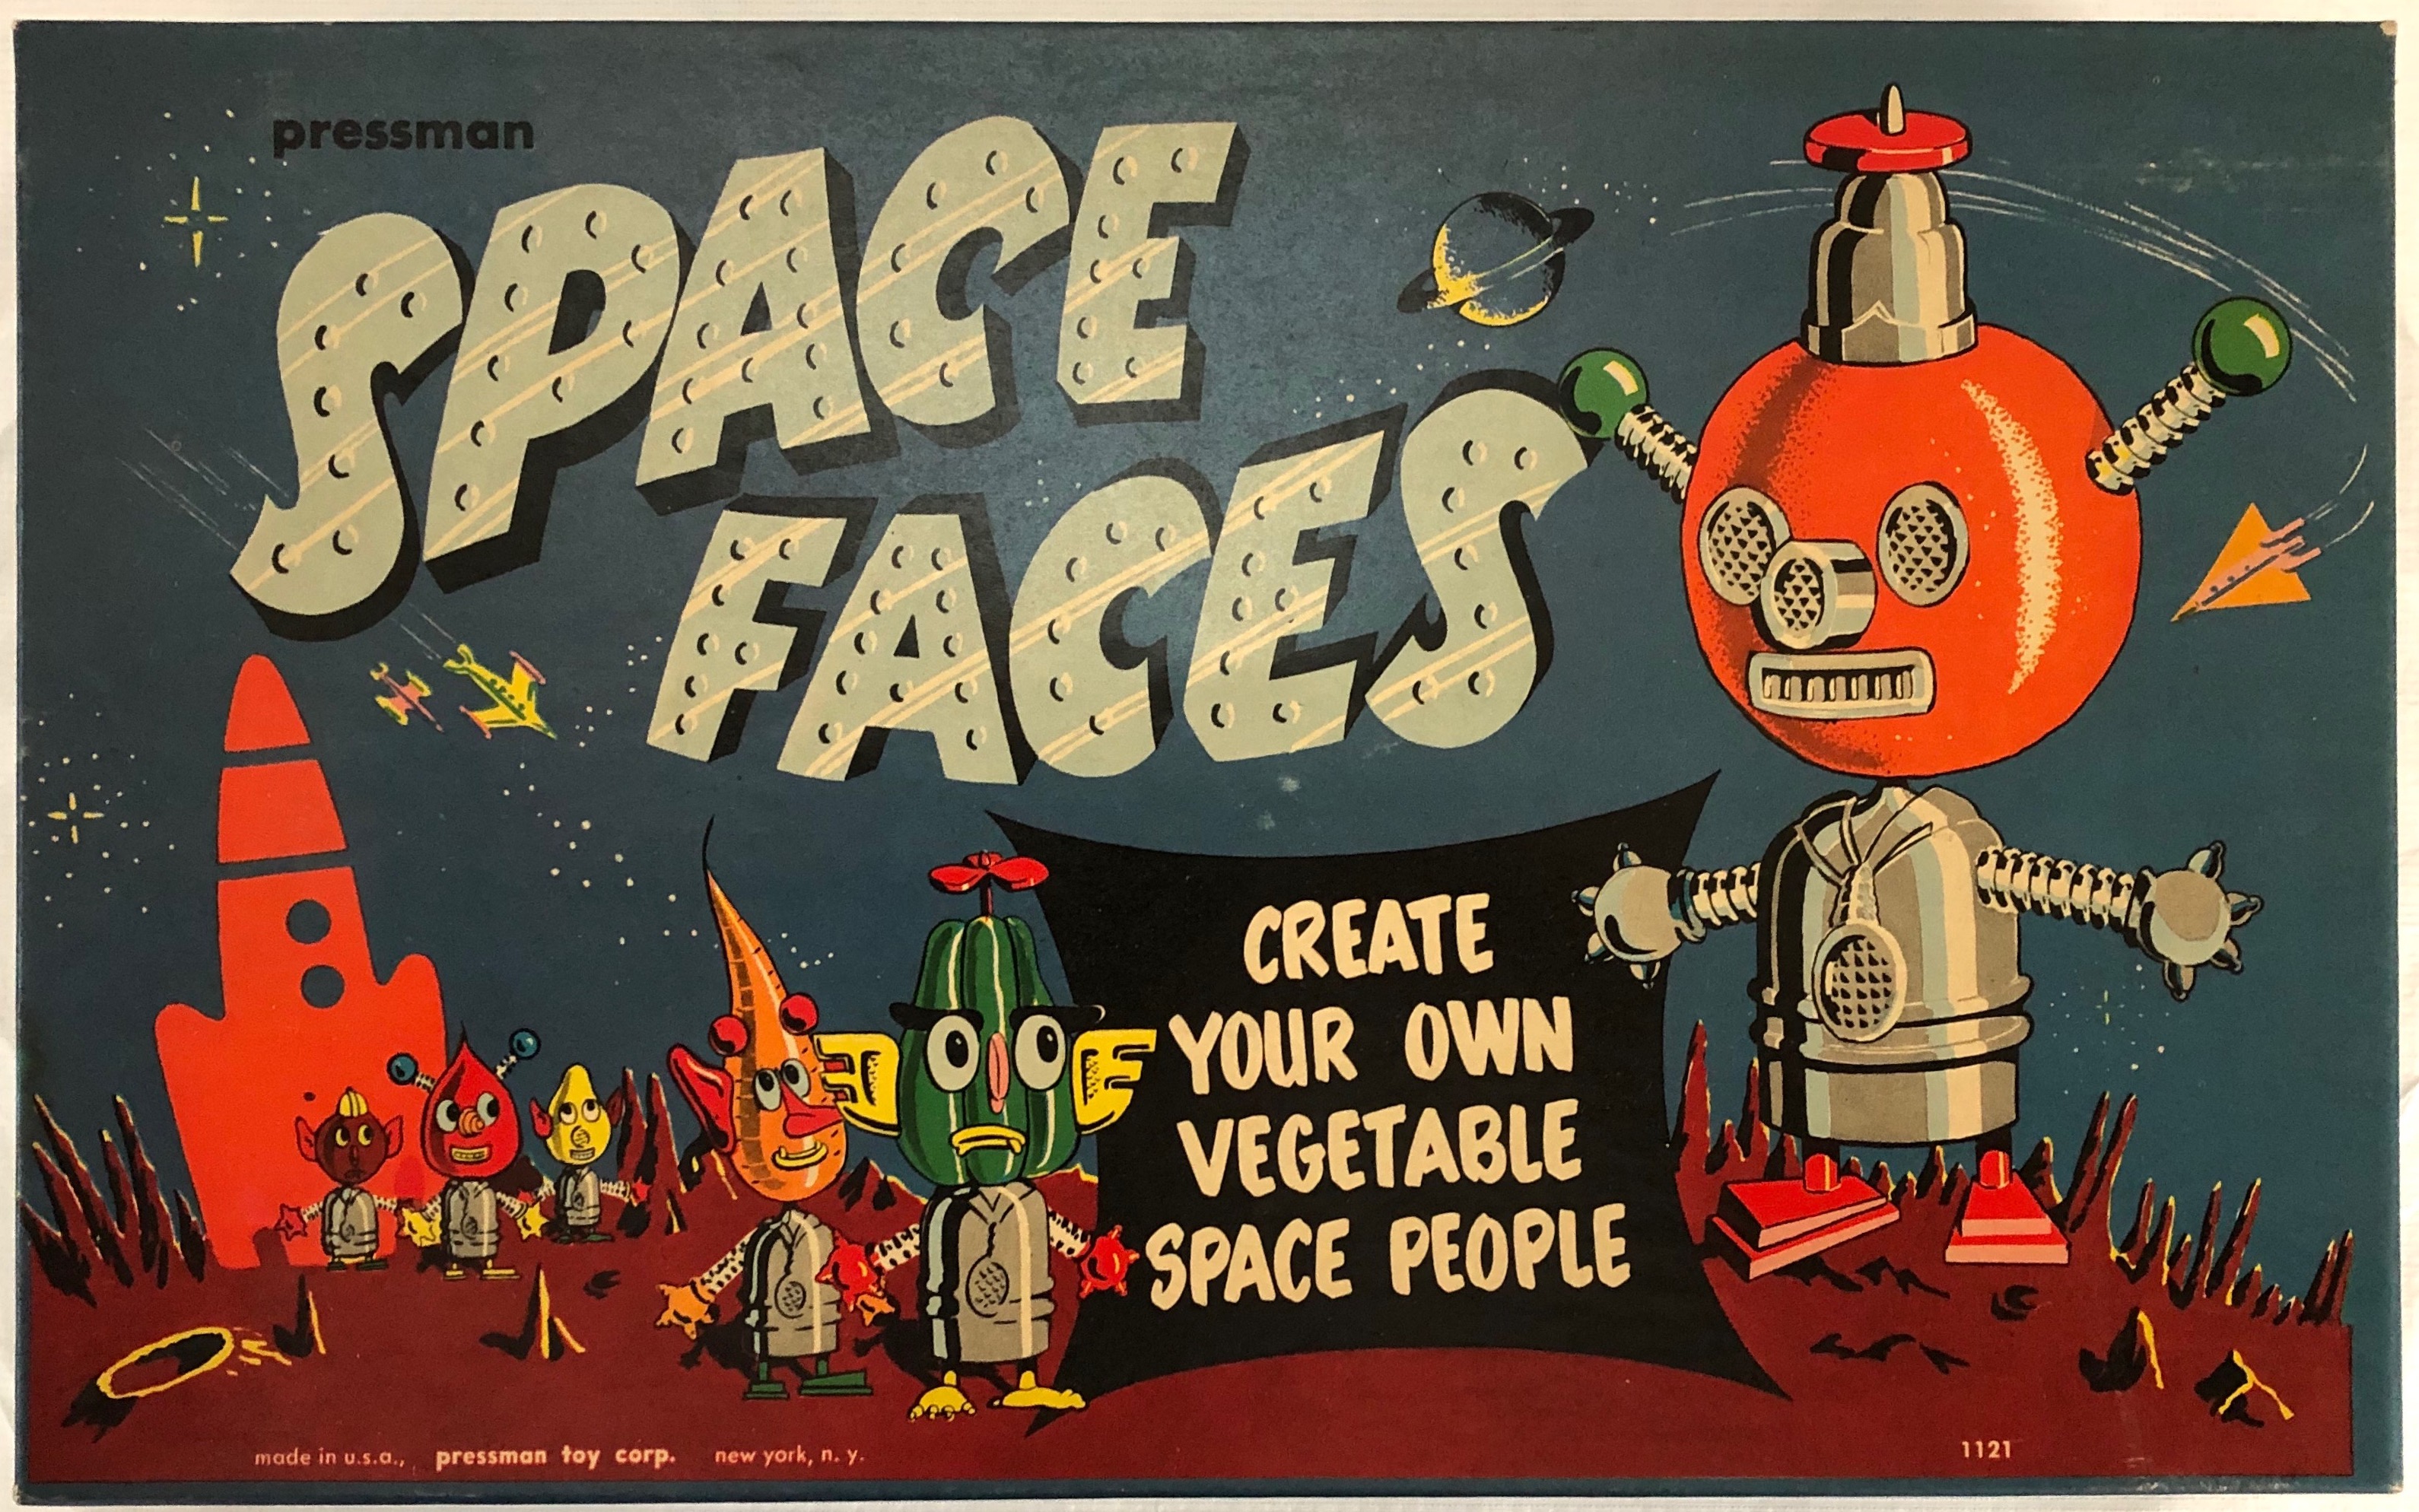 A colour photograph of a toy that turned vegetables into aliens dating from 1953. 